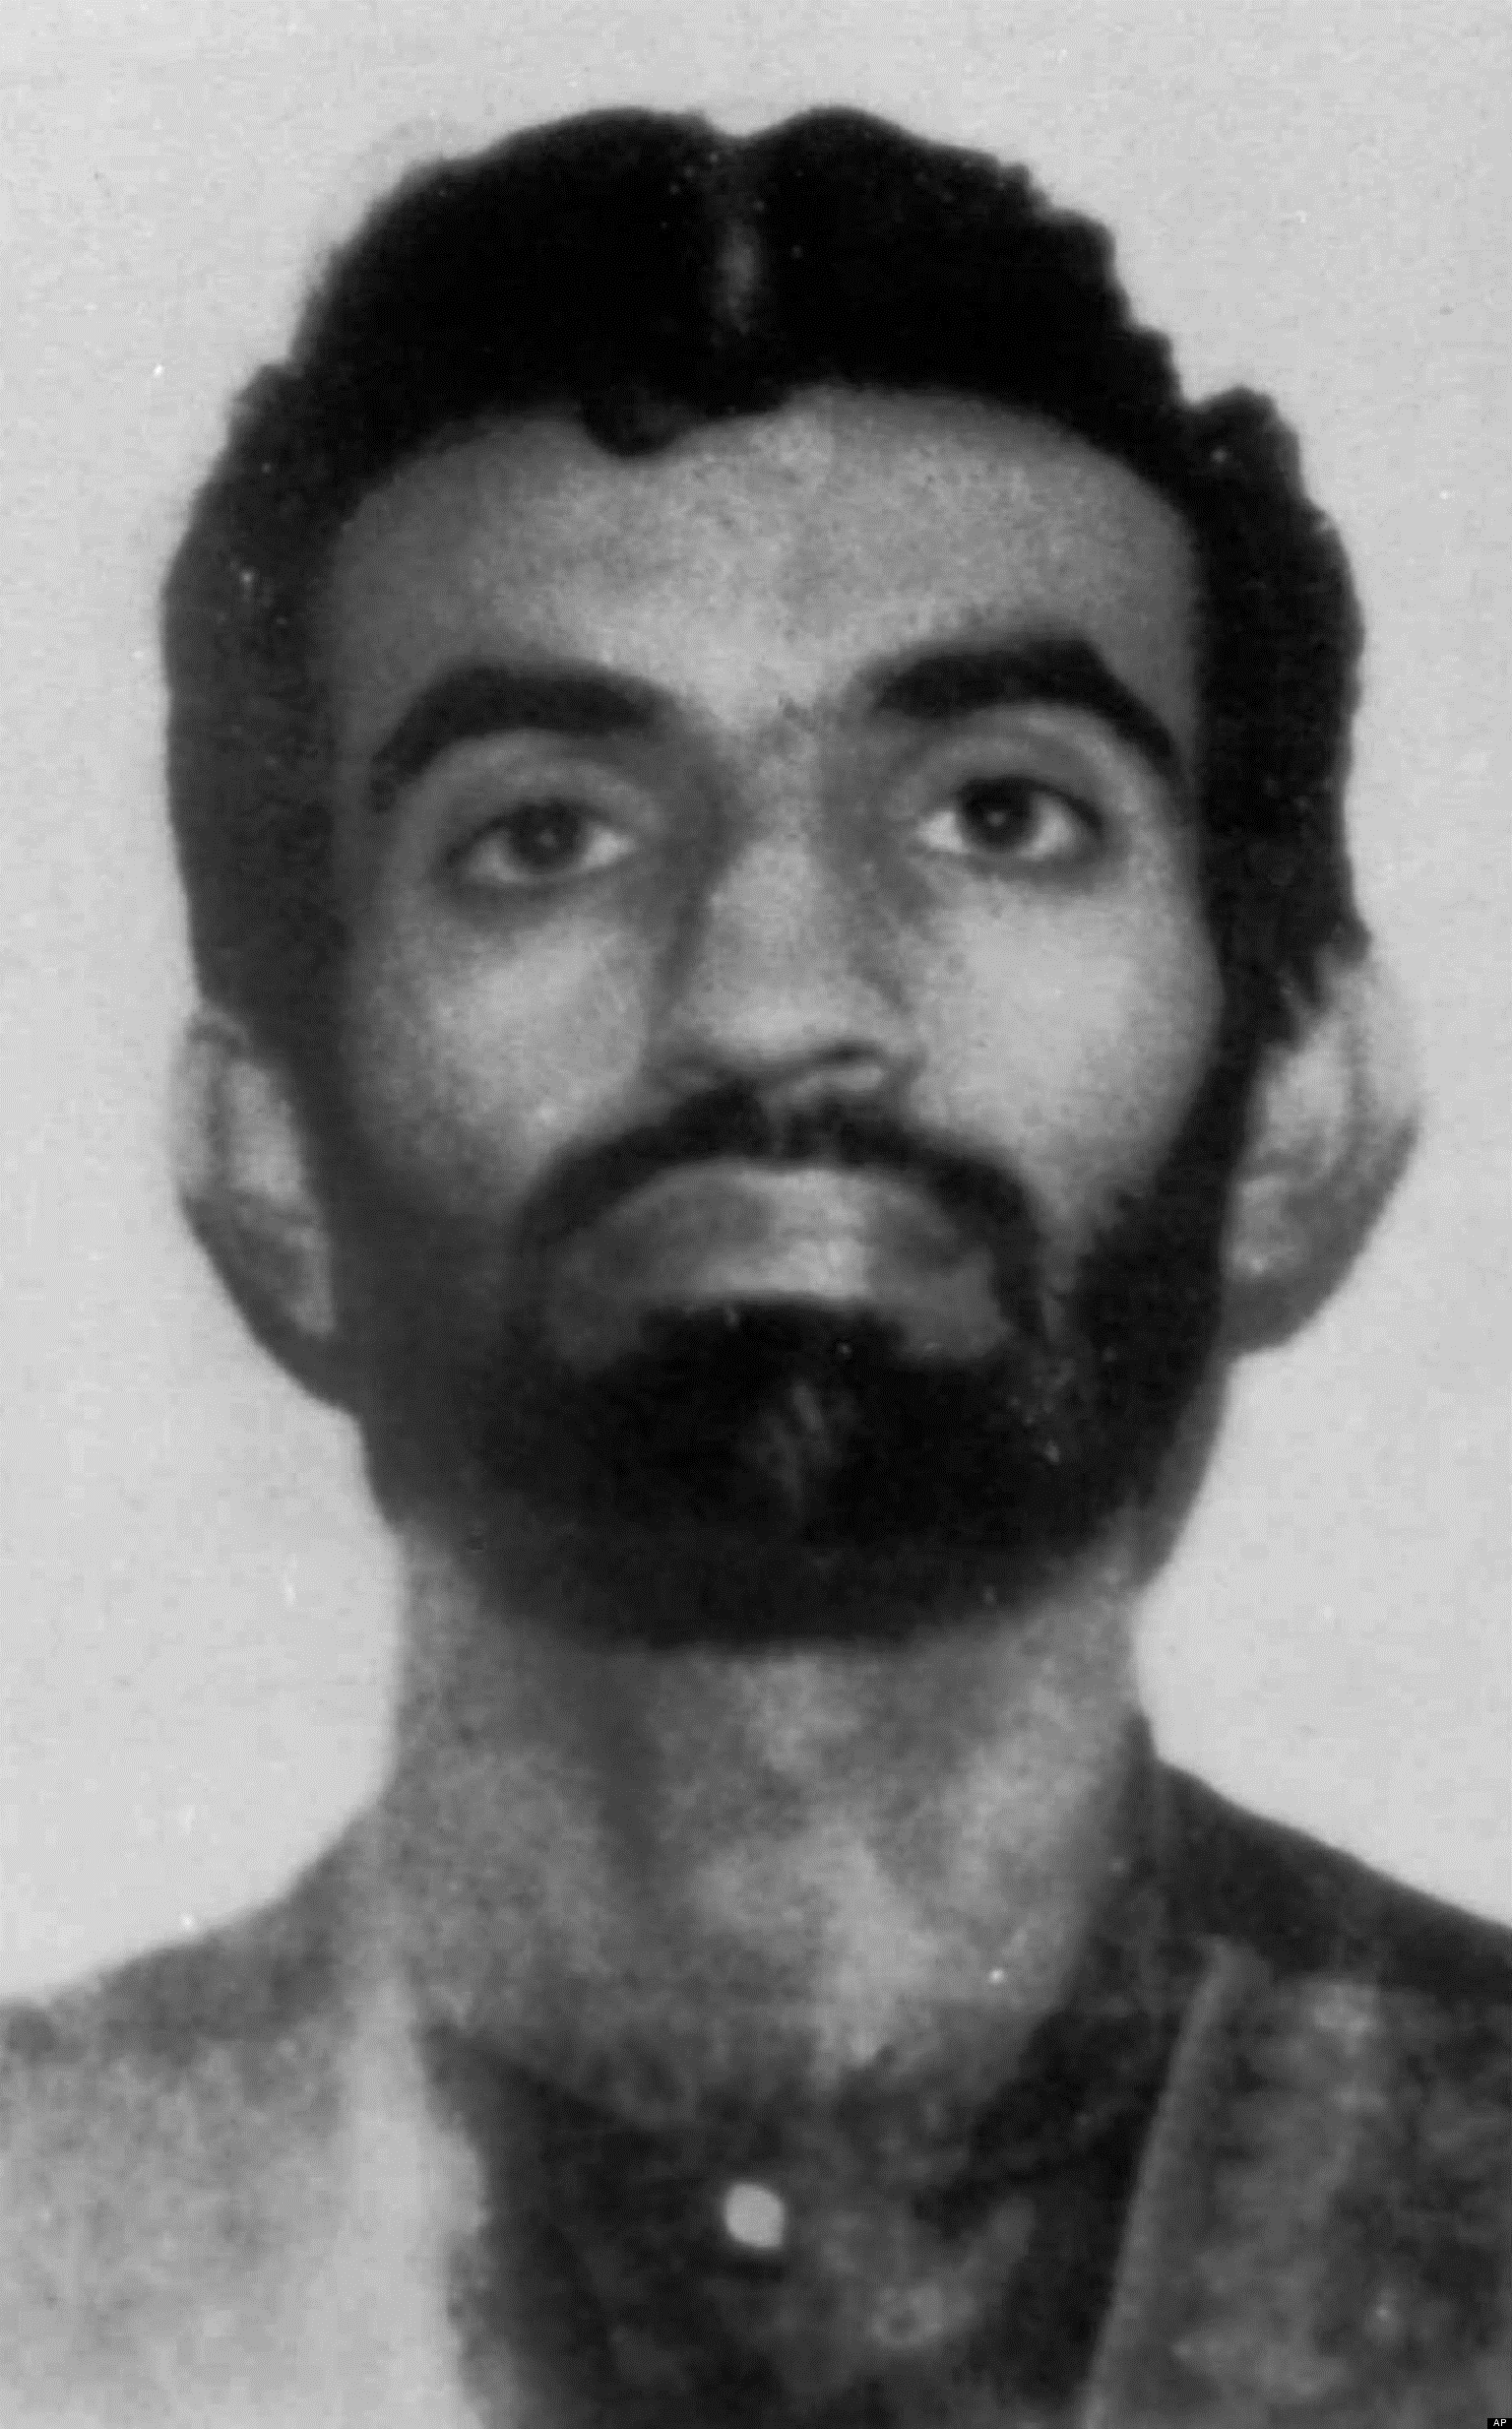 Ramzi Yousef, the mastermind of the 1993 World Trade Center bombing, is arrested in Islamabad, Pakistan.